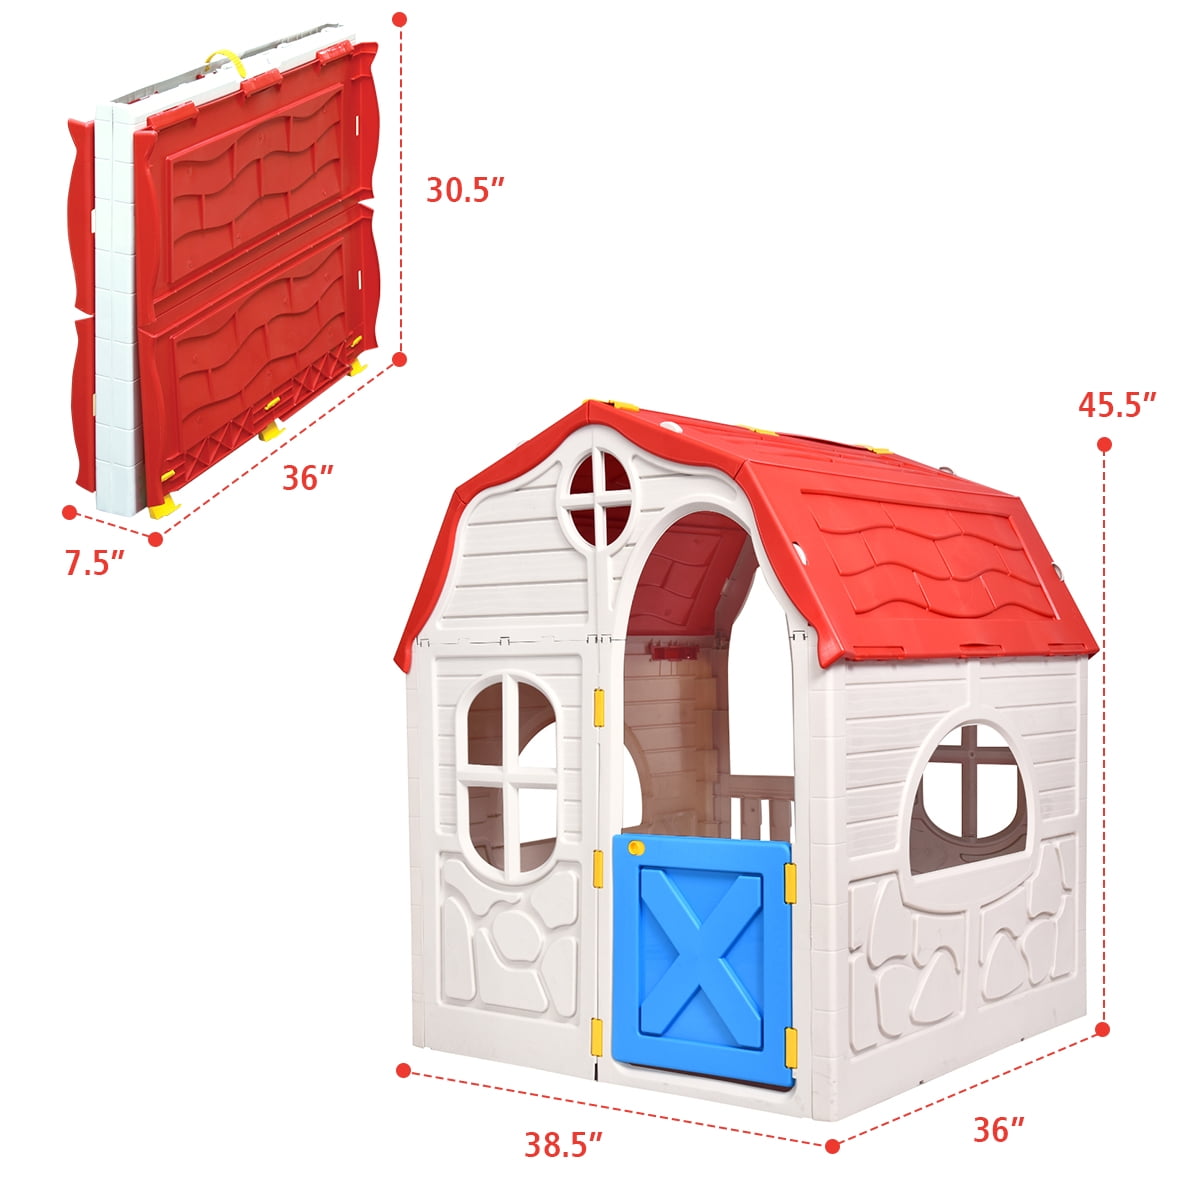 Costway Kids Cottage Playhouse Foldable Plastic Play House Indoor Outdoor Toy Portable - 2